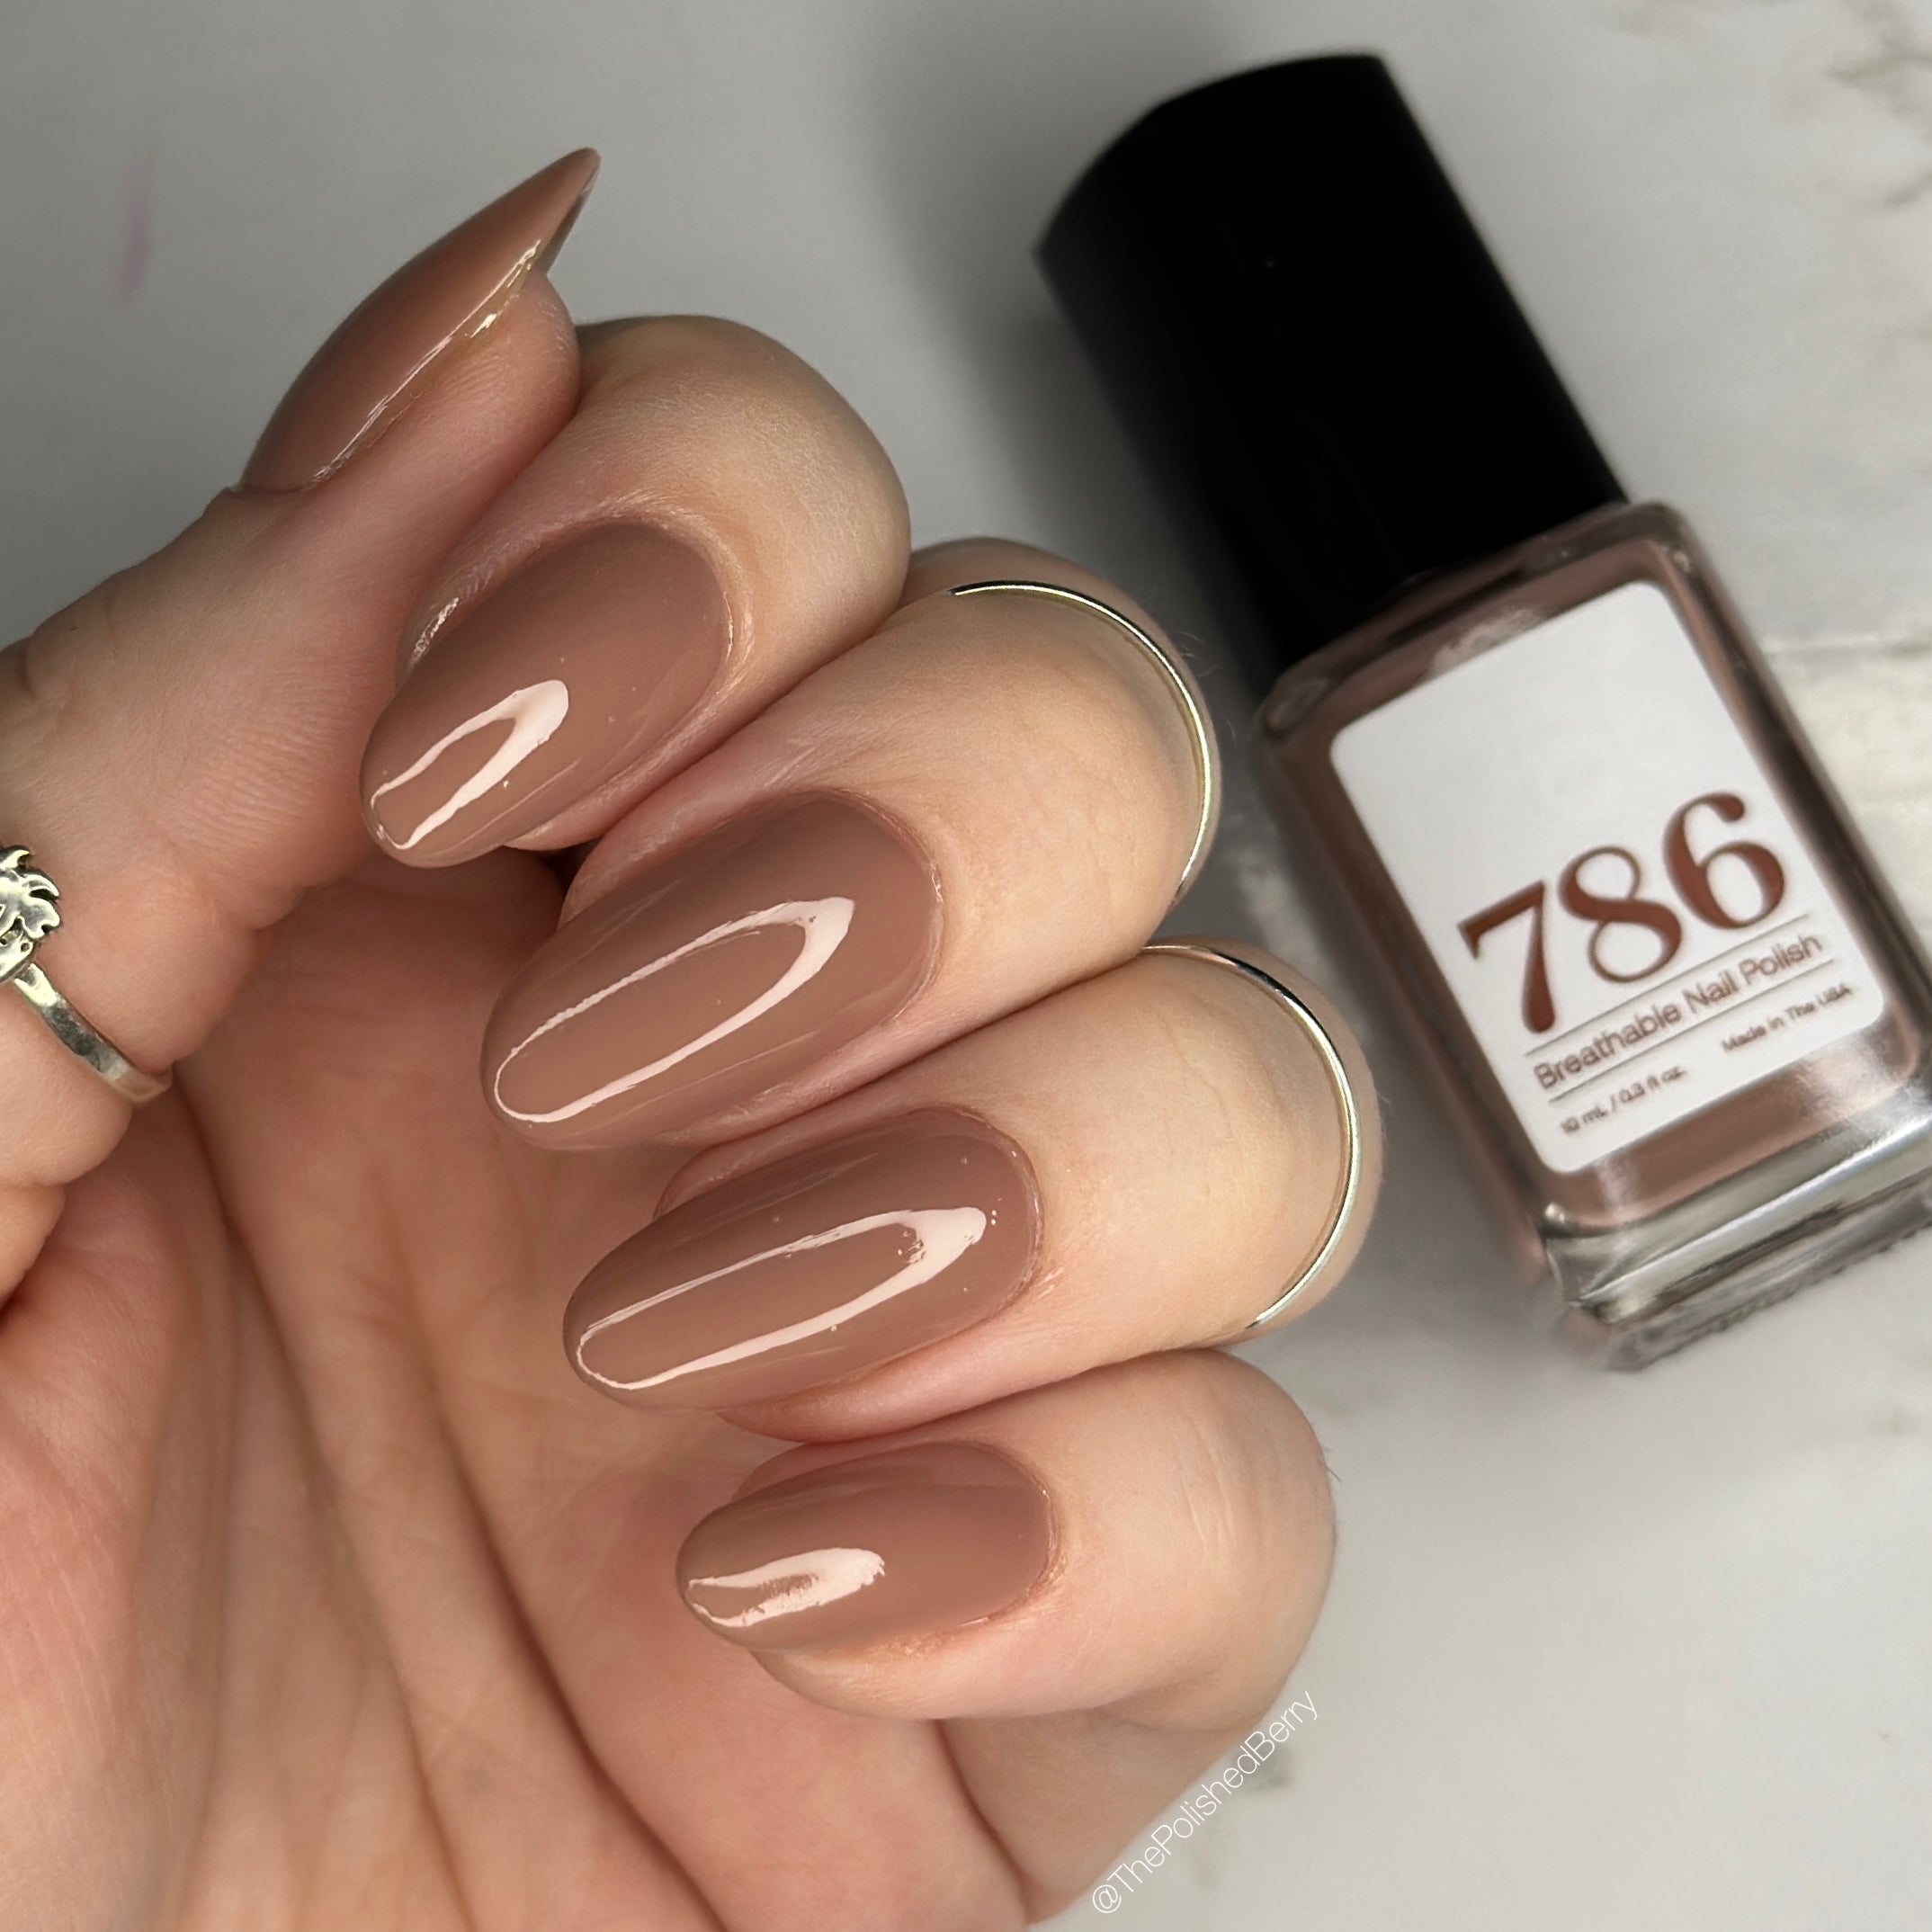 786 Hyderabad - Breathable Nail Polish - Price in India, Buy 786 Hyderabad  - Breathable Nail Polish Online In India, Reviews, Ratings & Features |  Flipkart.com